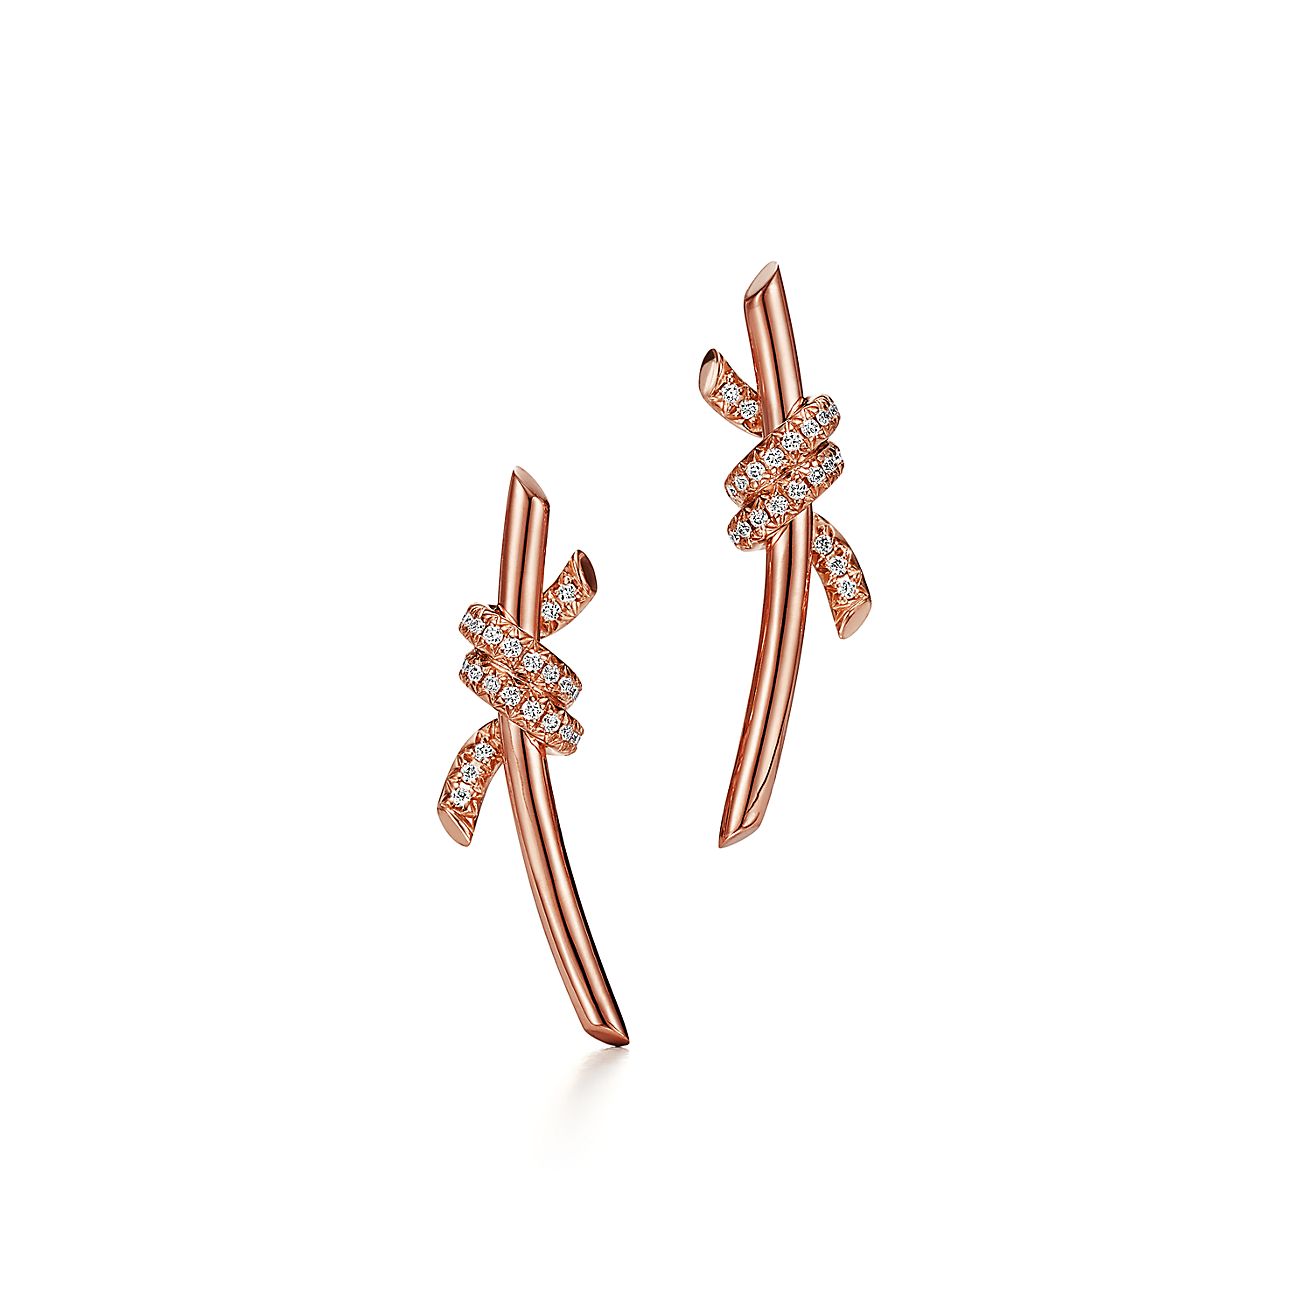 Vintage Tiffany and Co. 18 Karat Yellow Gold Diamond Bow Earrings | Bow  earrings, Gold tassel earrings, Lovely jewellery